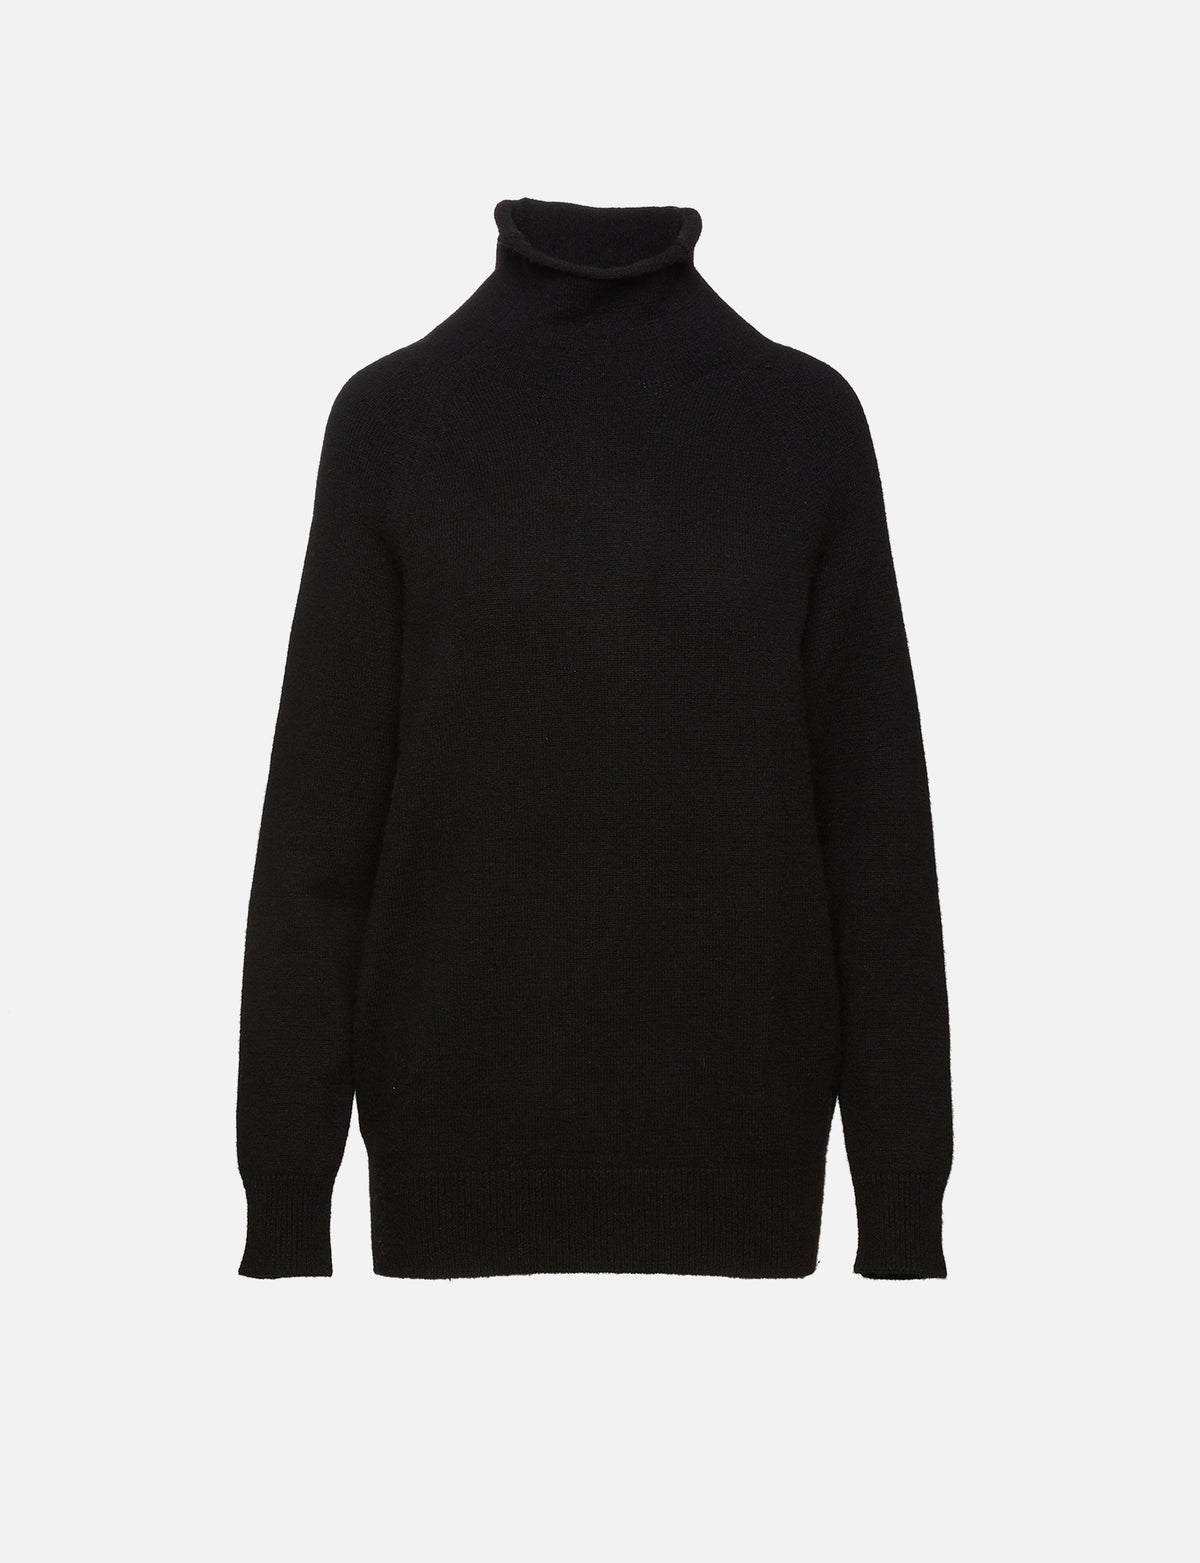 view 4 - Funnel Neck Pullover